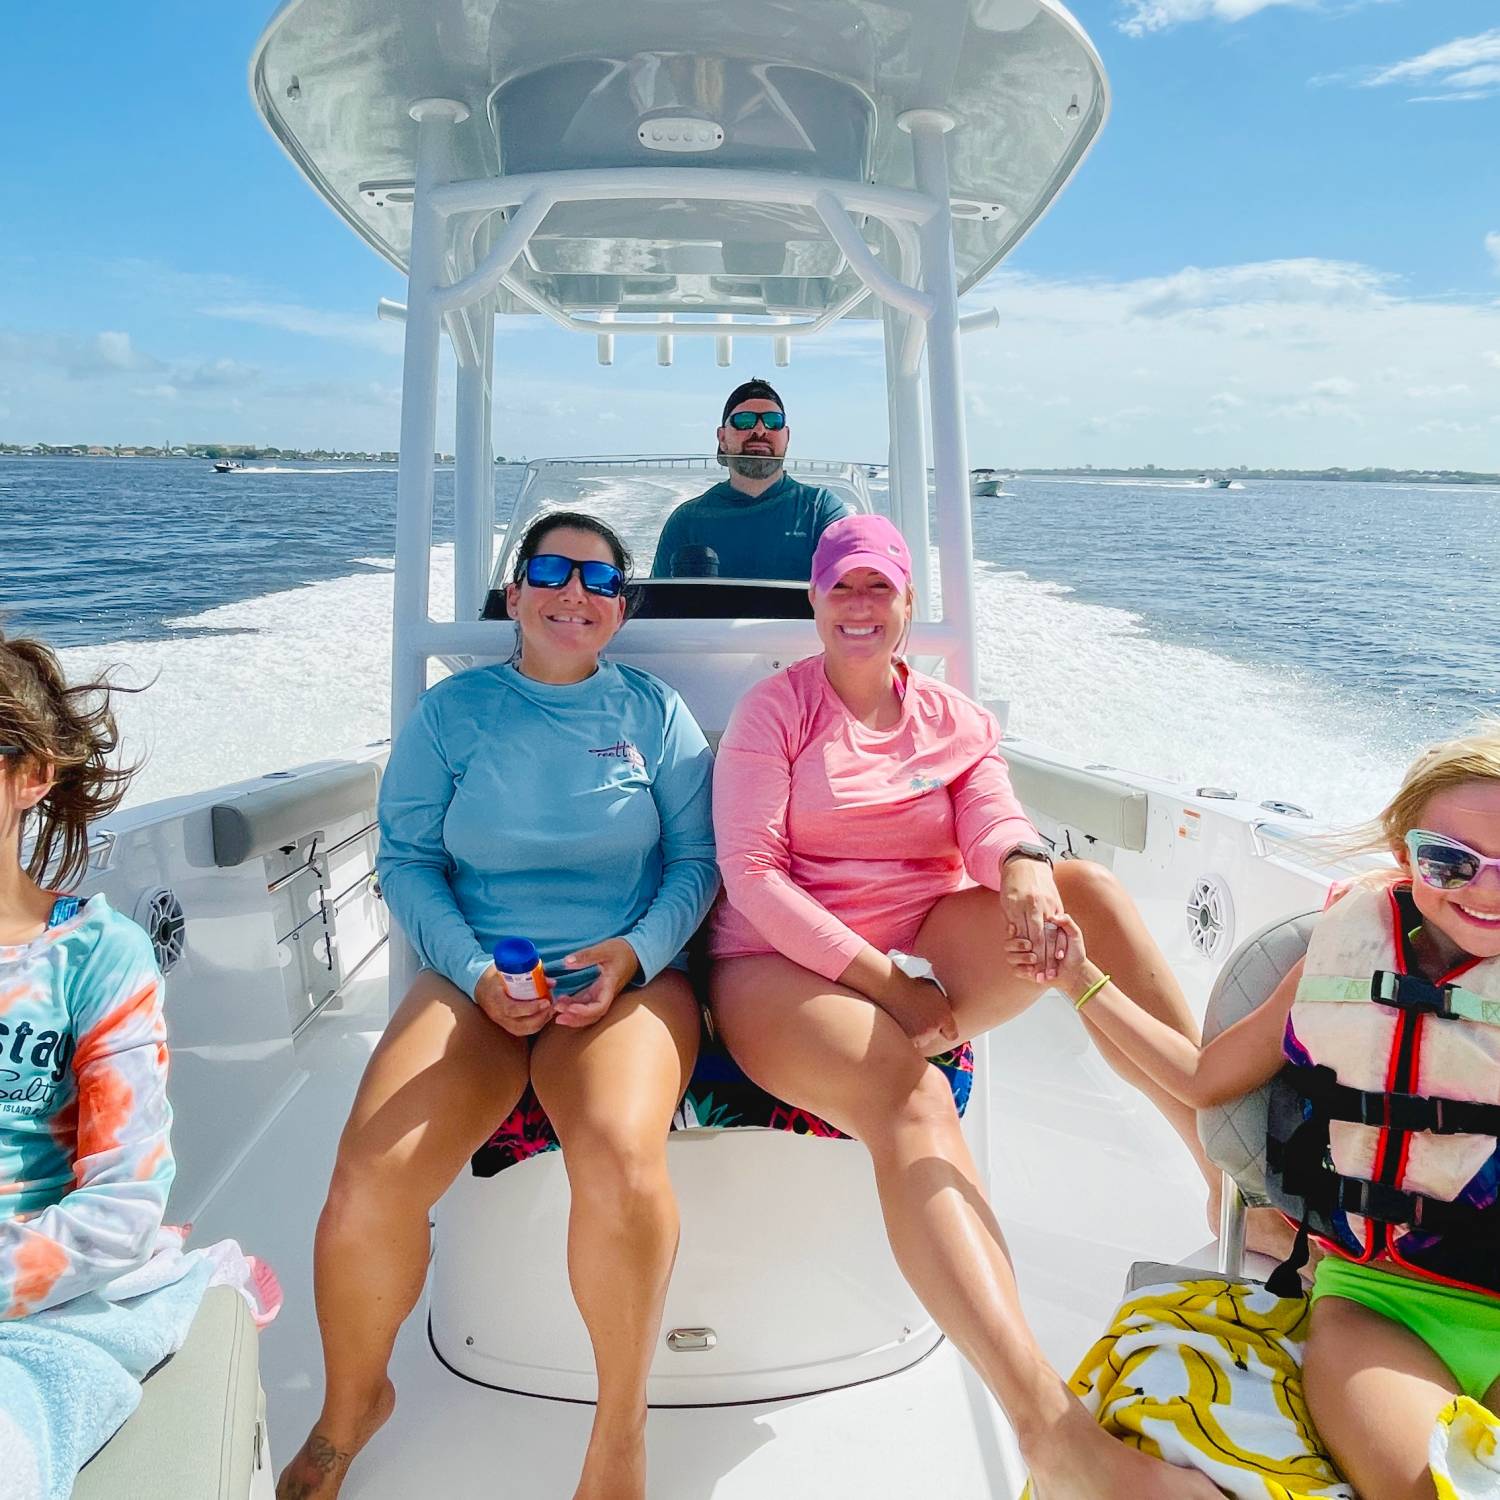 Title: Our Paradise - On board their Sportsman Open 212 Center Console - Location: Cape Coral, FL. Participating in the Photo Contest #SportsmanApril